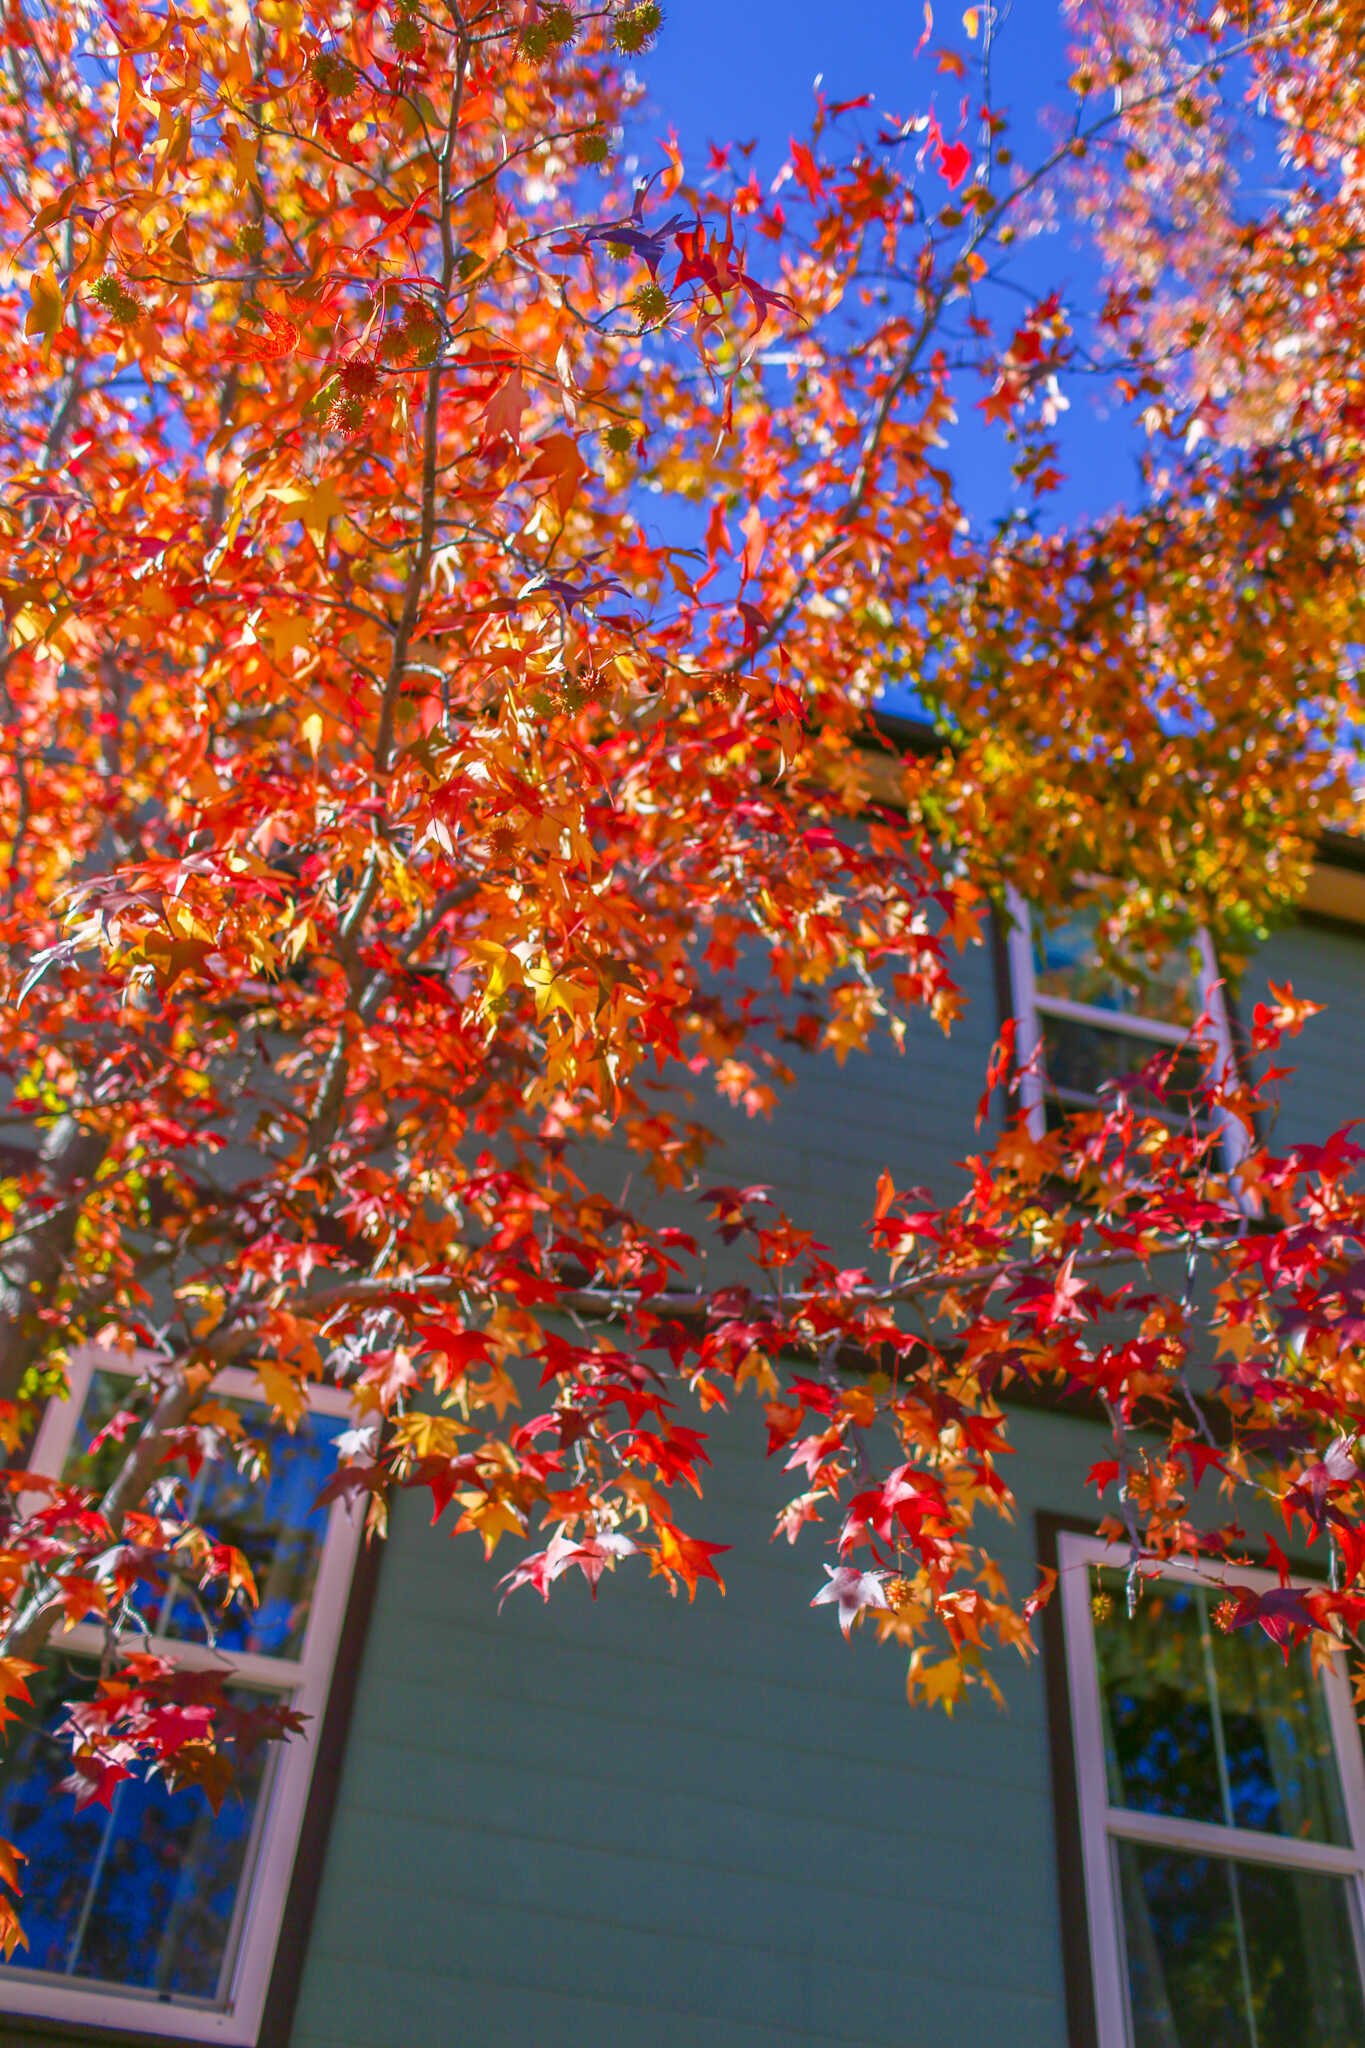 The Complete Travel Guide to Julian, California - November colorful fall foliage in Julian.